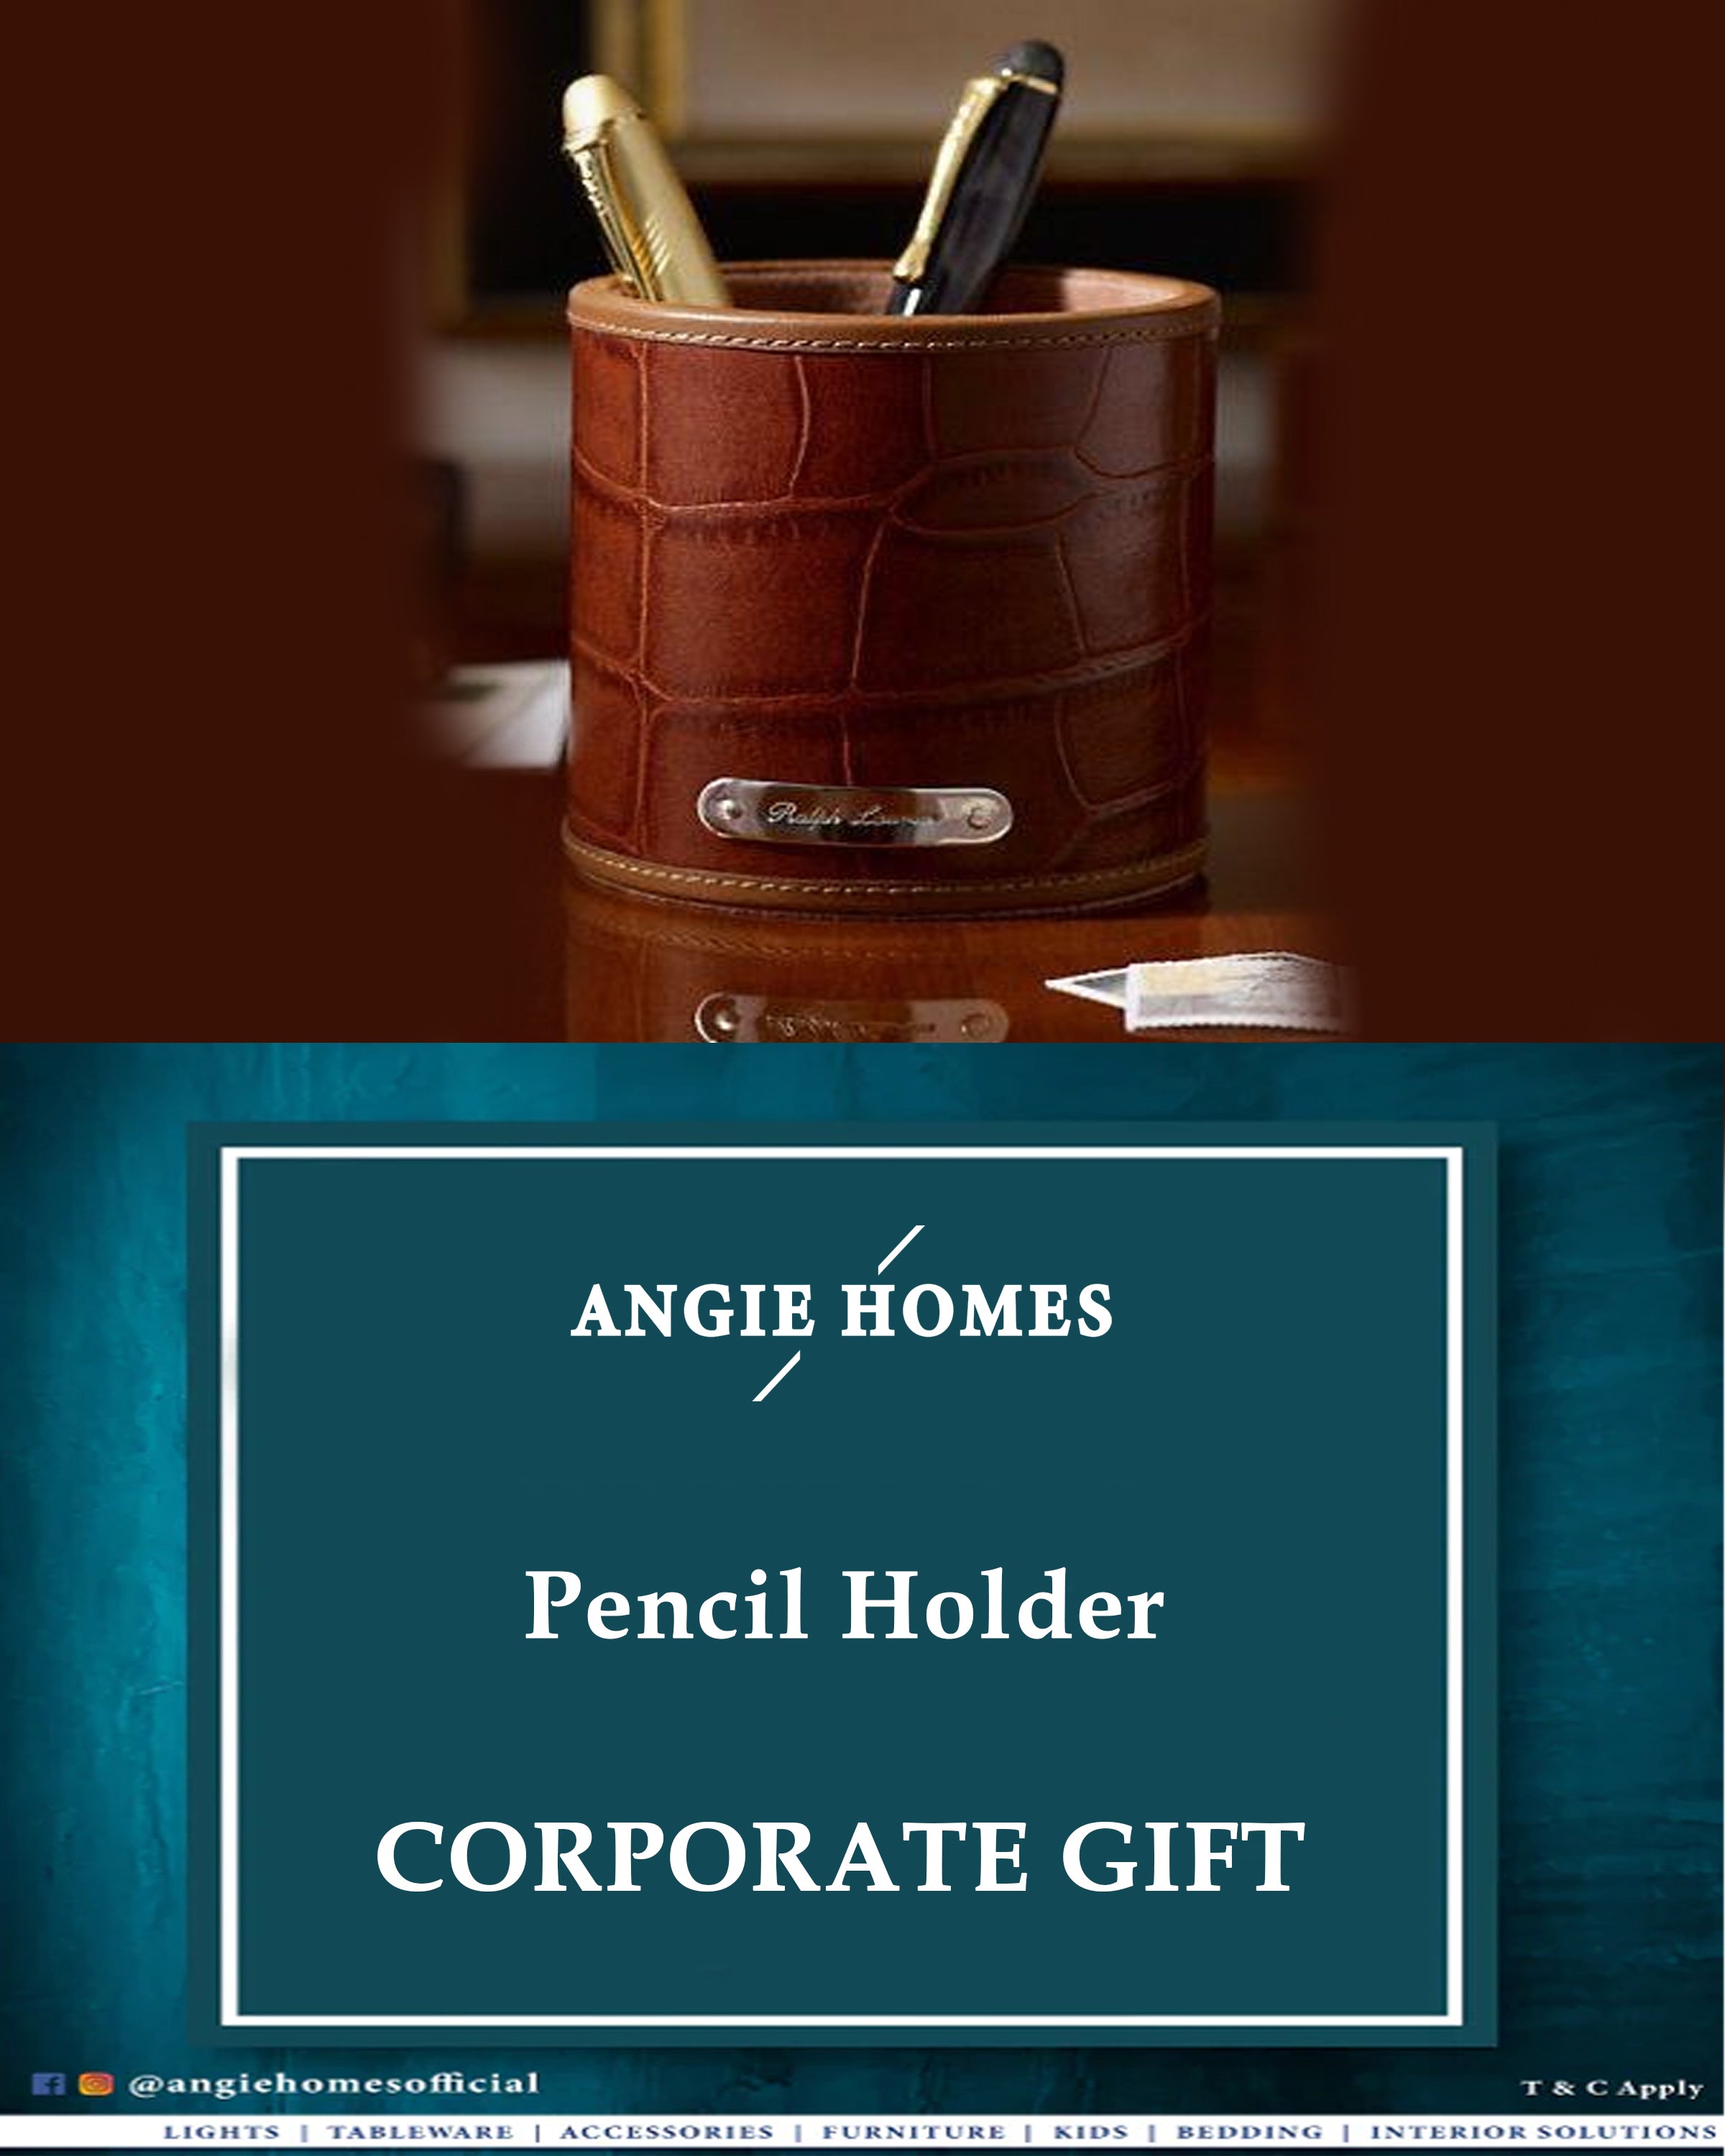 Pencil Holder for Wedding, House Warming & Corporate Gift ANGIE HOMES